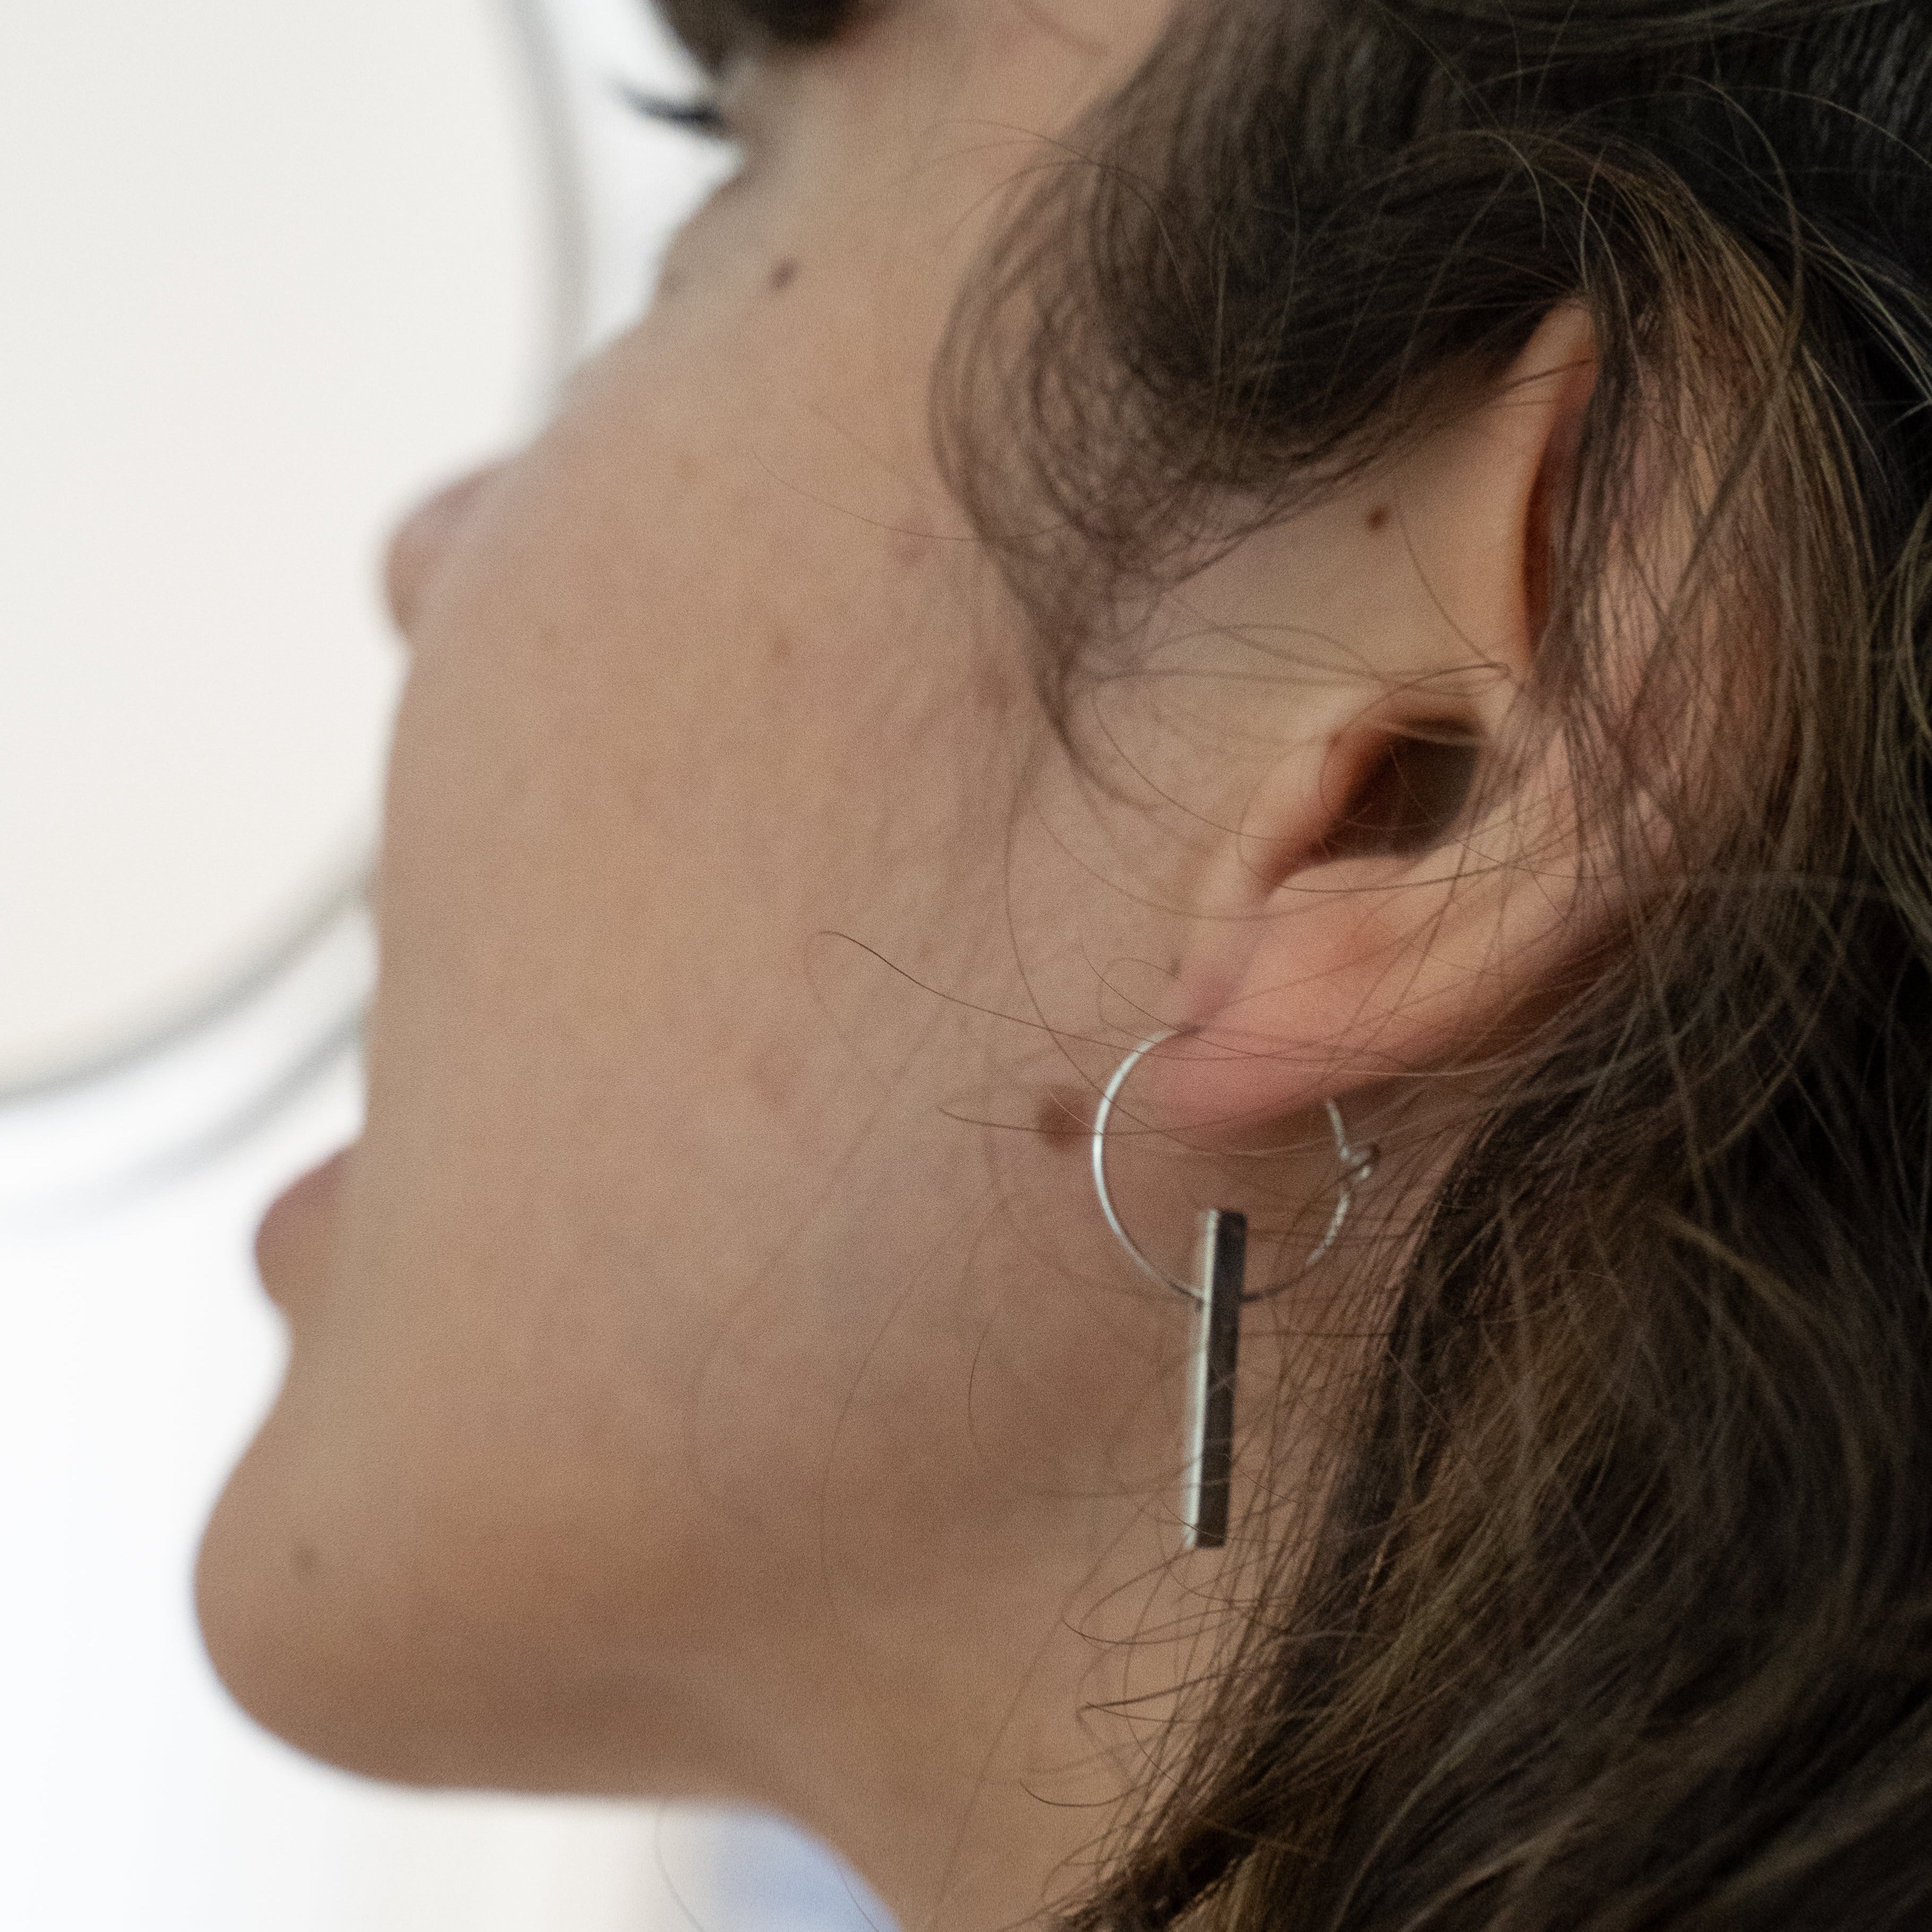 The Minimalist Scandinavian Ray earrings by MeganCollinsJewellery with the delicate circle and bar, are an abstract representation of the sun. Wear them as a reminder to shine your inner light.